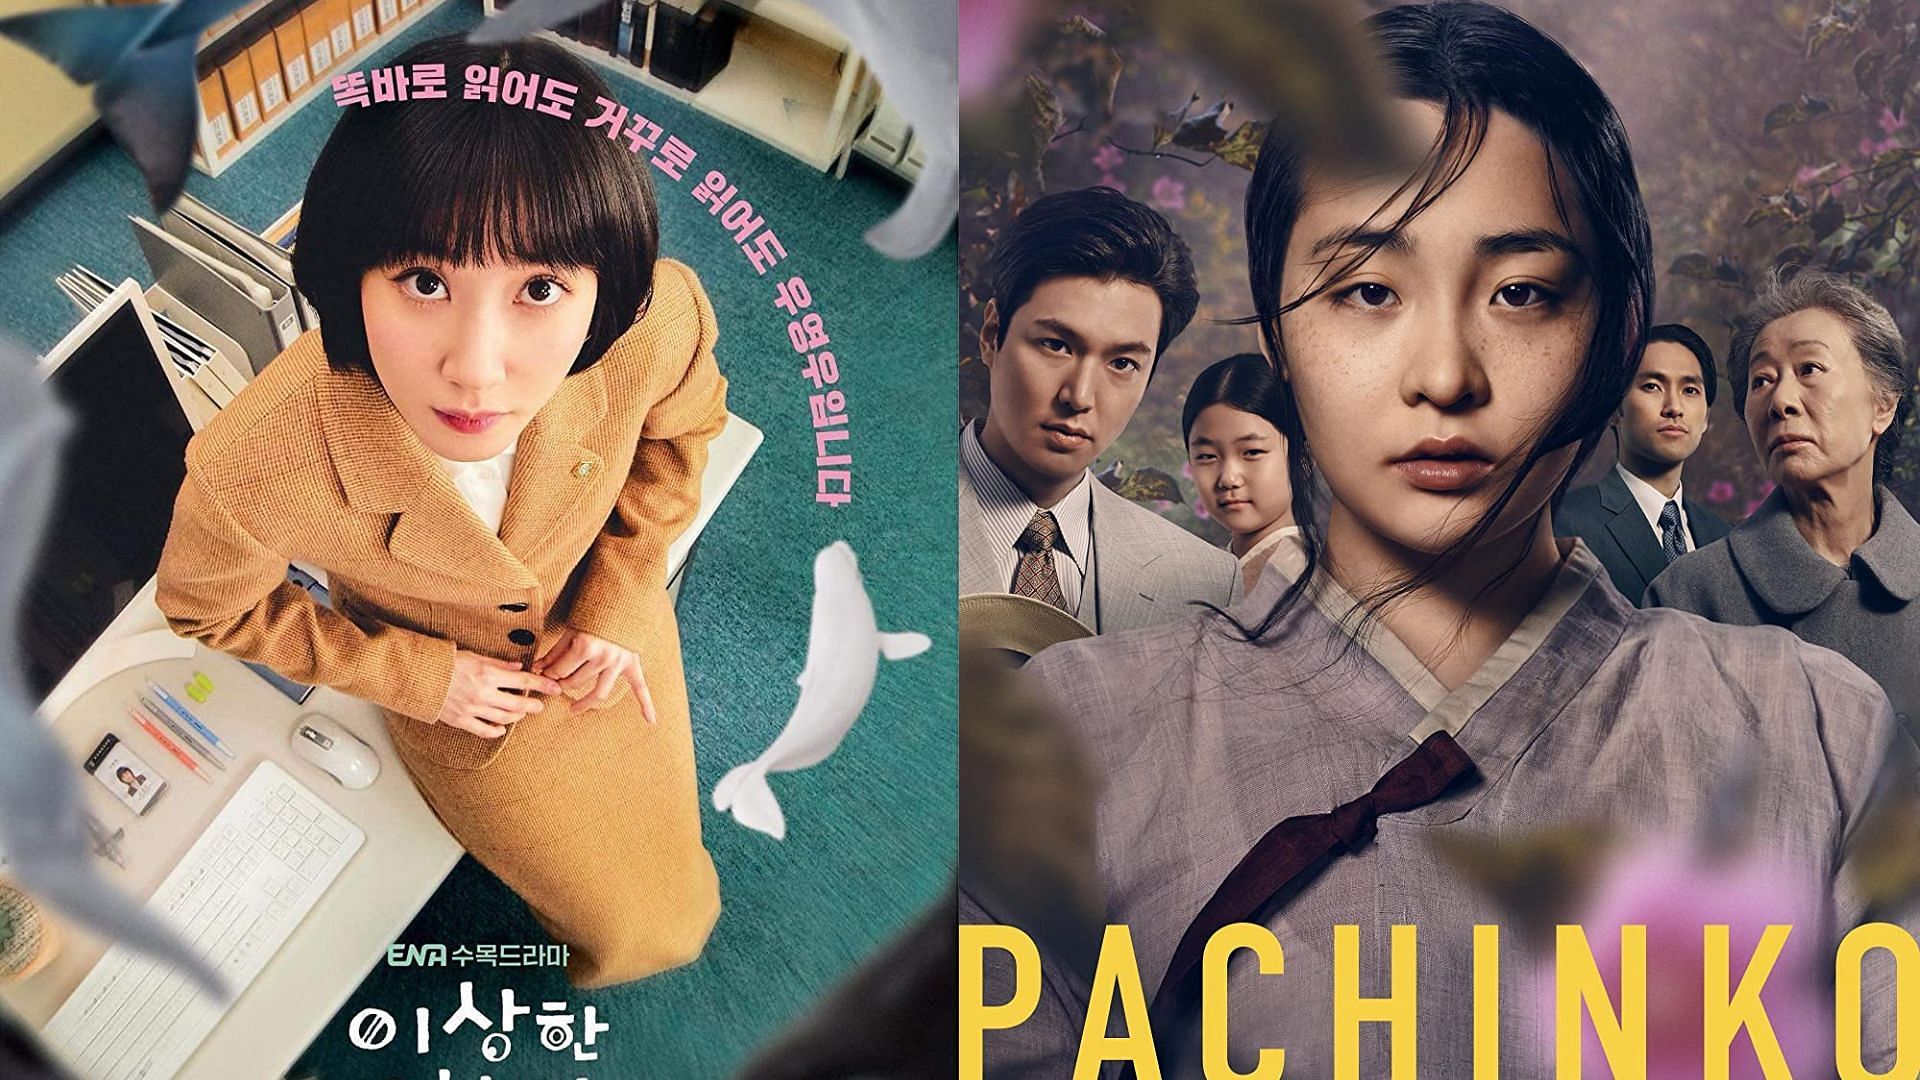 Extraordinary Attorney Woo and Pachinko get nominated at the 28th Critics Choice Award (Images via IMDb)